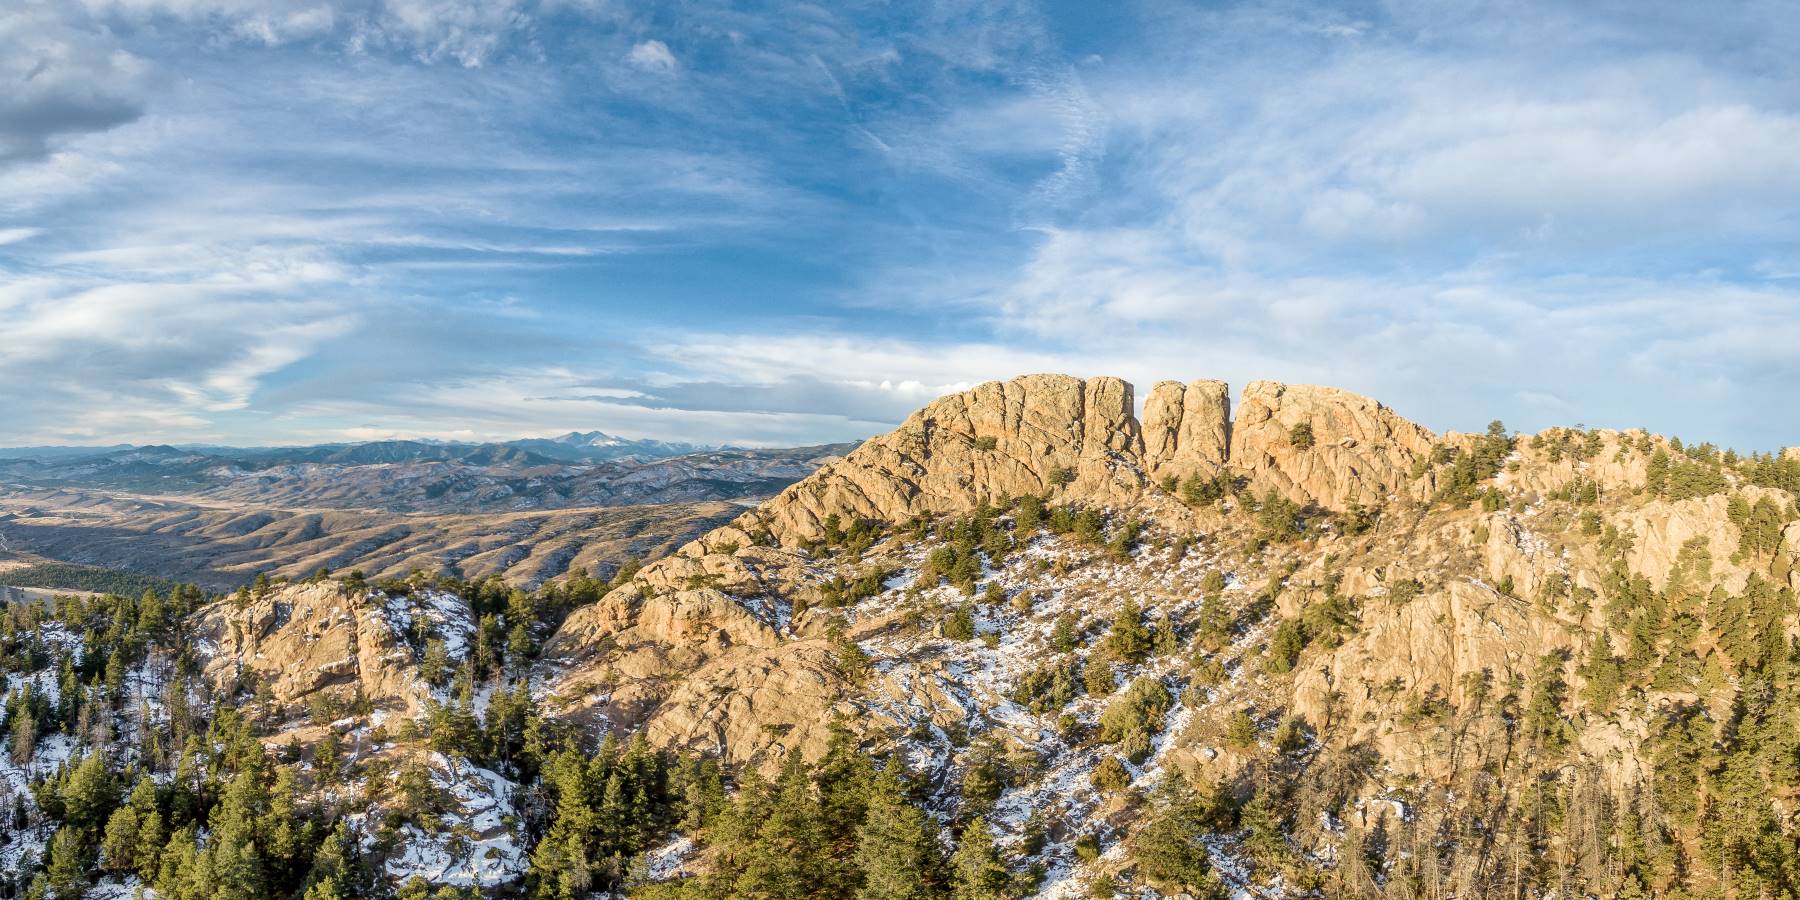 When deciding where to go hiking around Fort Collins, Horsetooth Mountain Loop is a must-do trail with rock formations, pine forests, and blue skies.